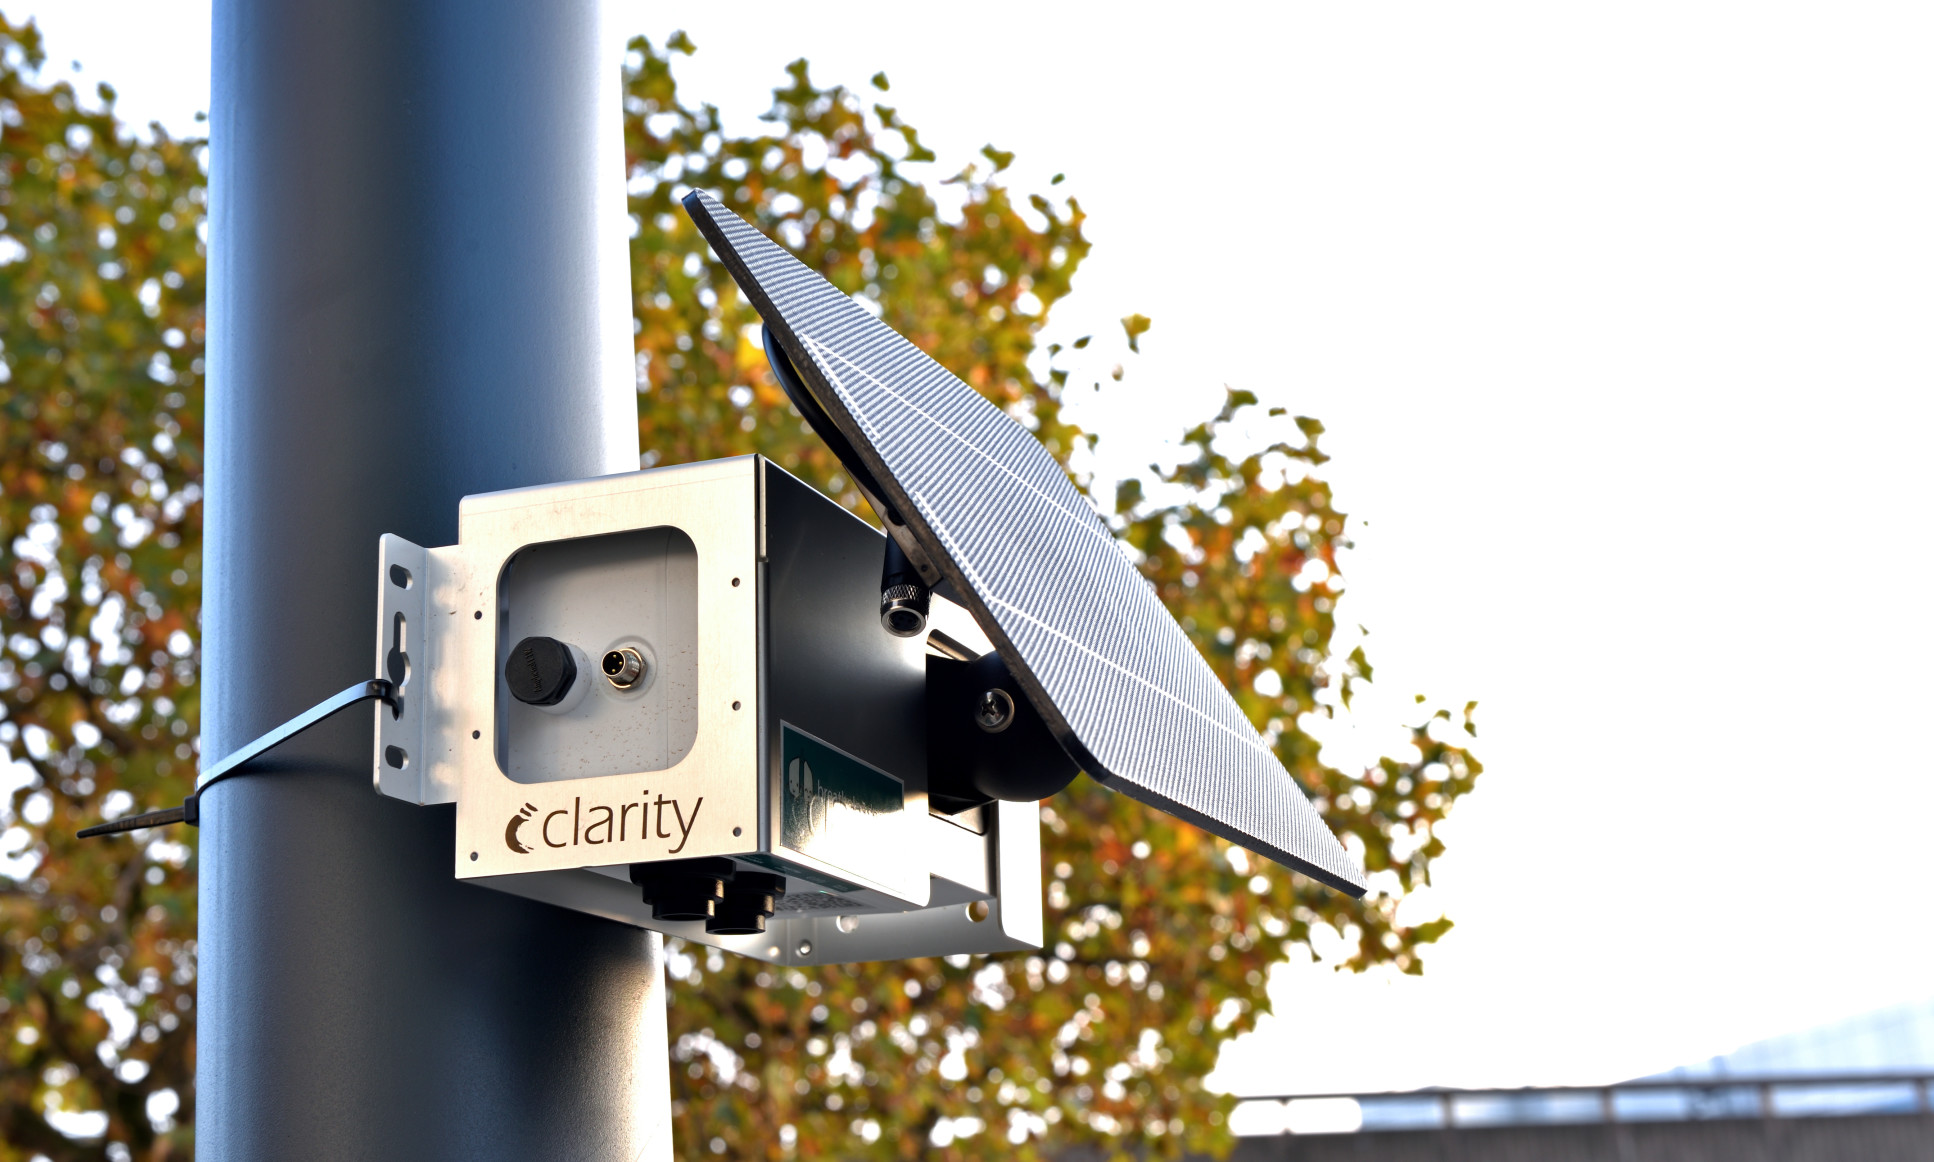 A Breathe London sensor attached to a lamp post in London.